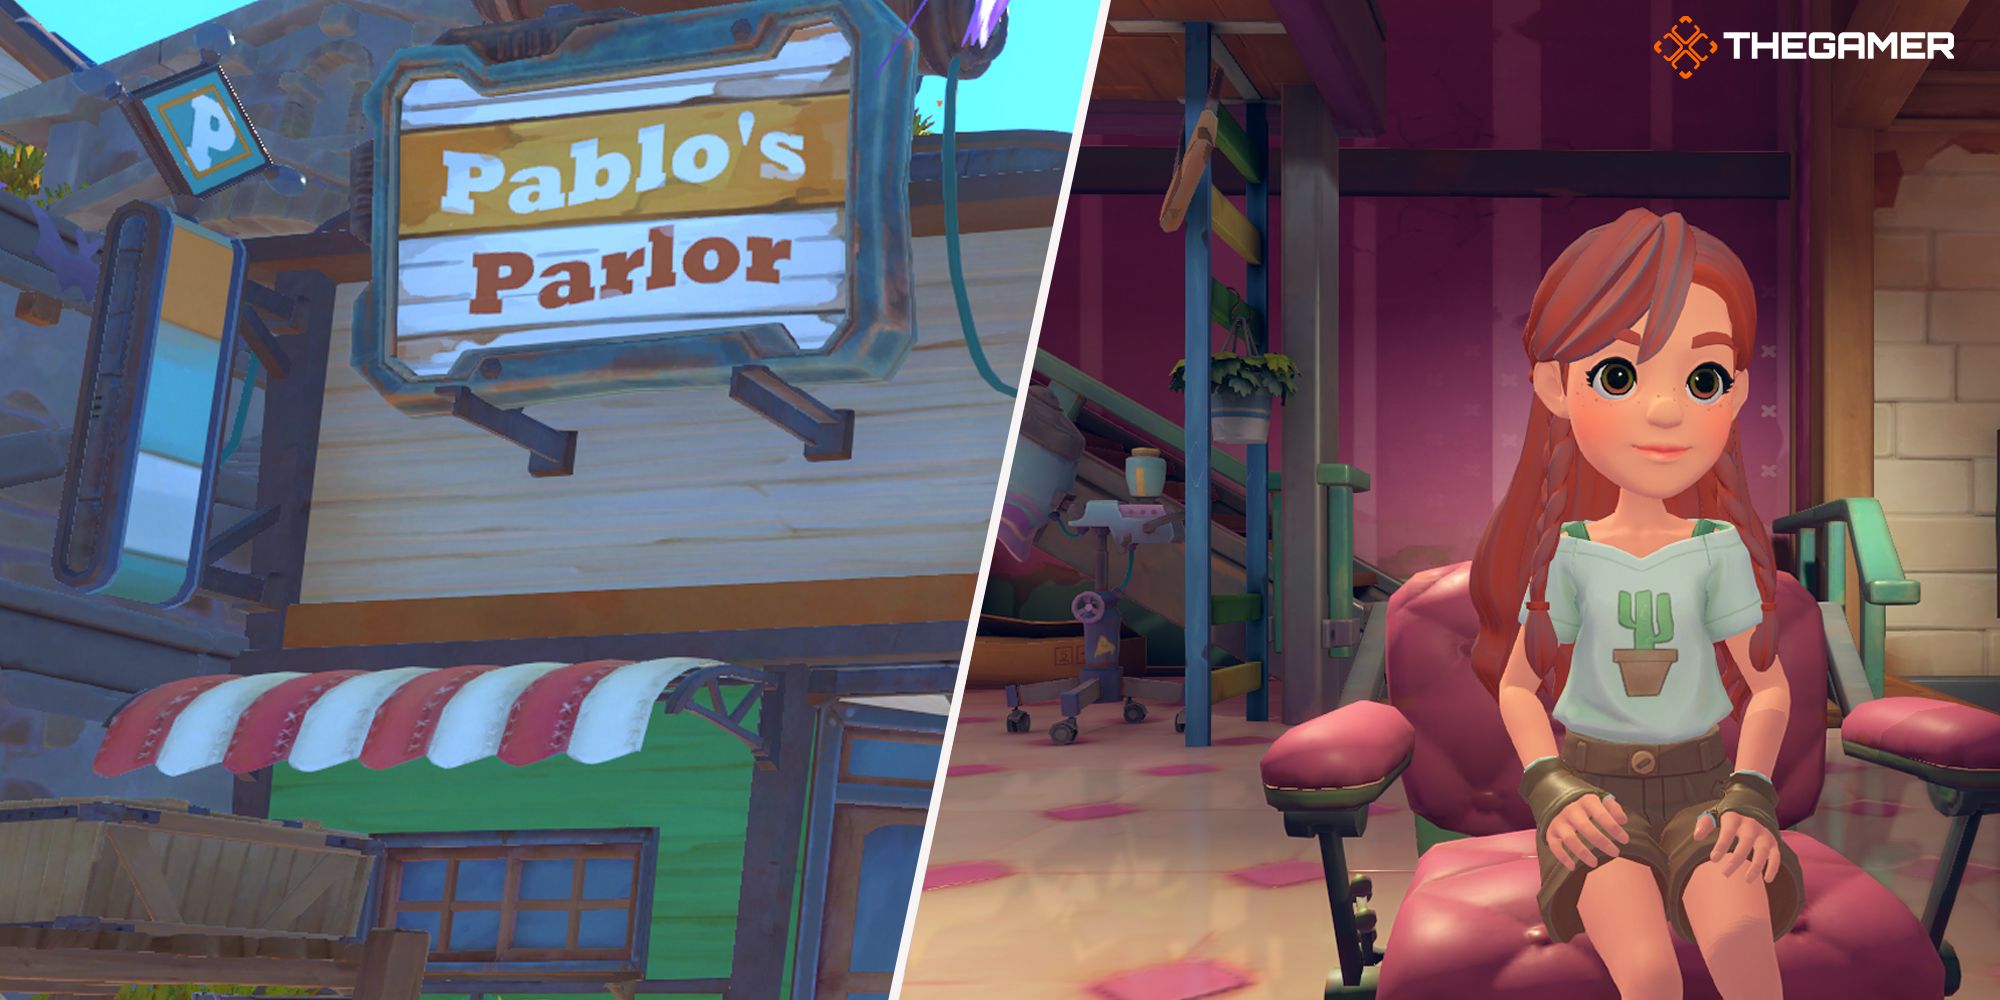 Comined images of Pablo's Parlor and the builder in My Time At Sandrock